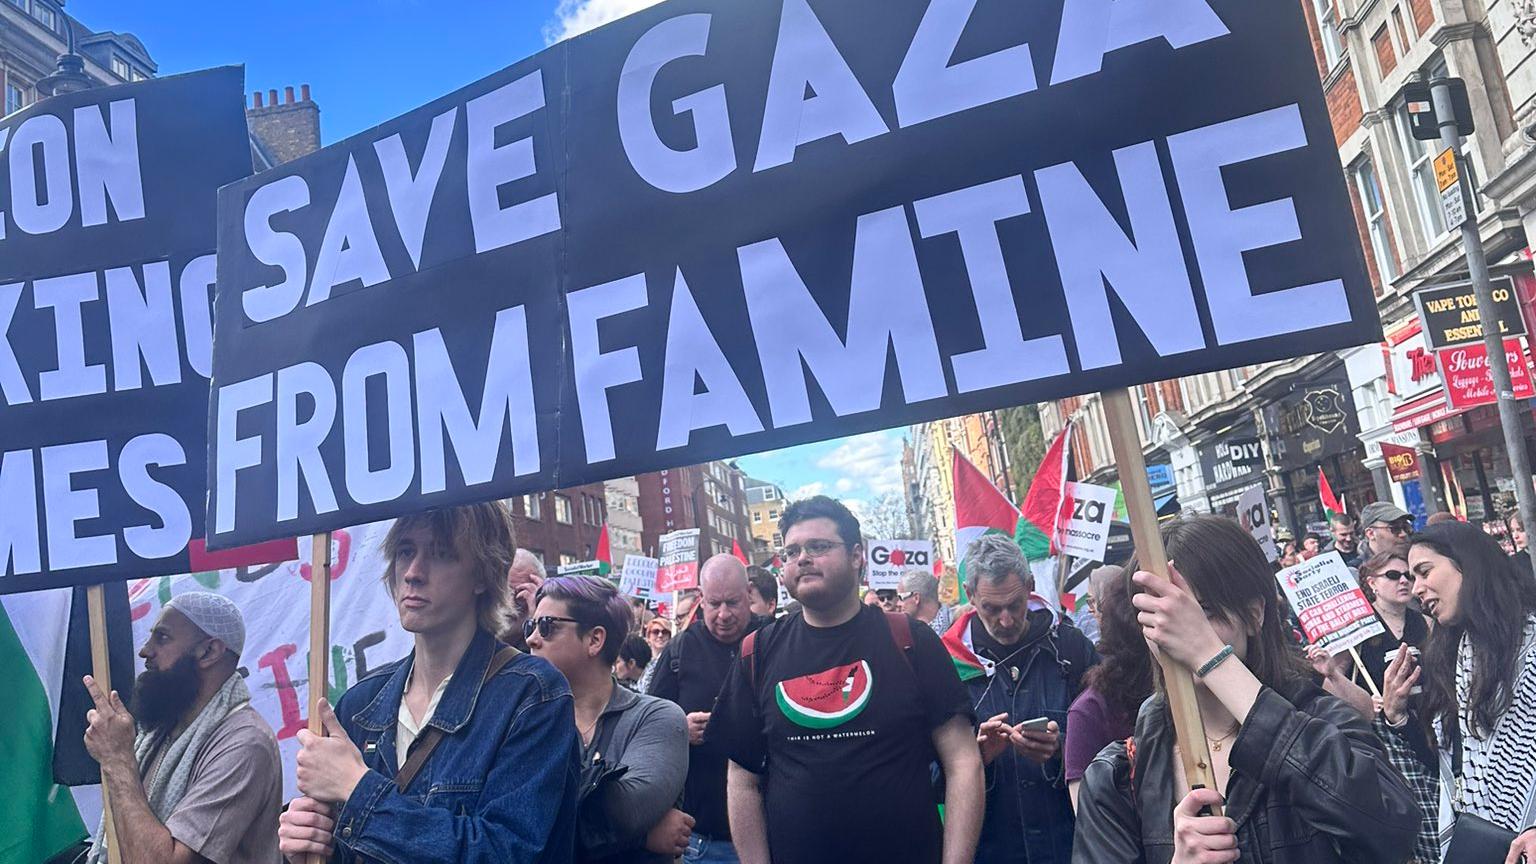 This is the eleventh protest in London claiming a ceasefire in Gaza.